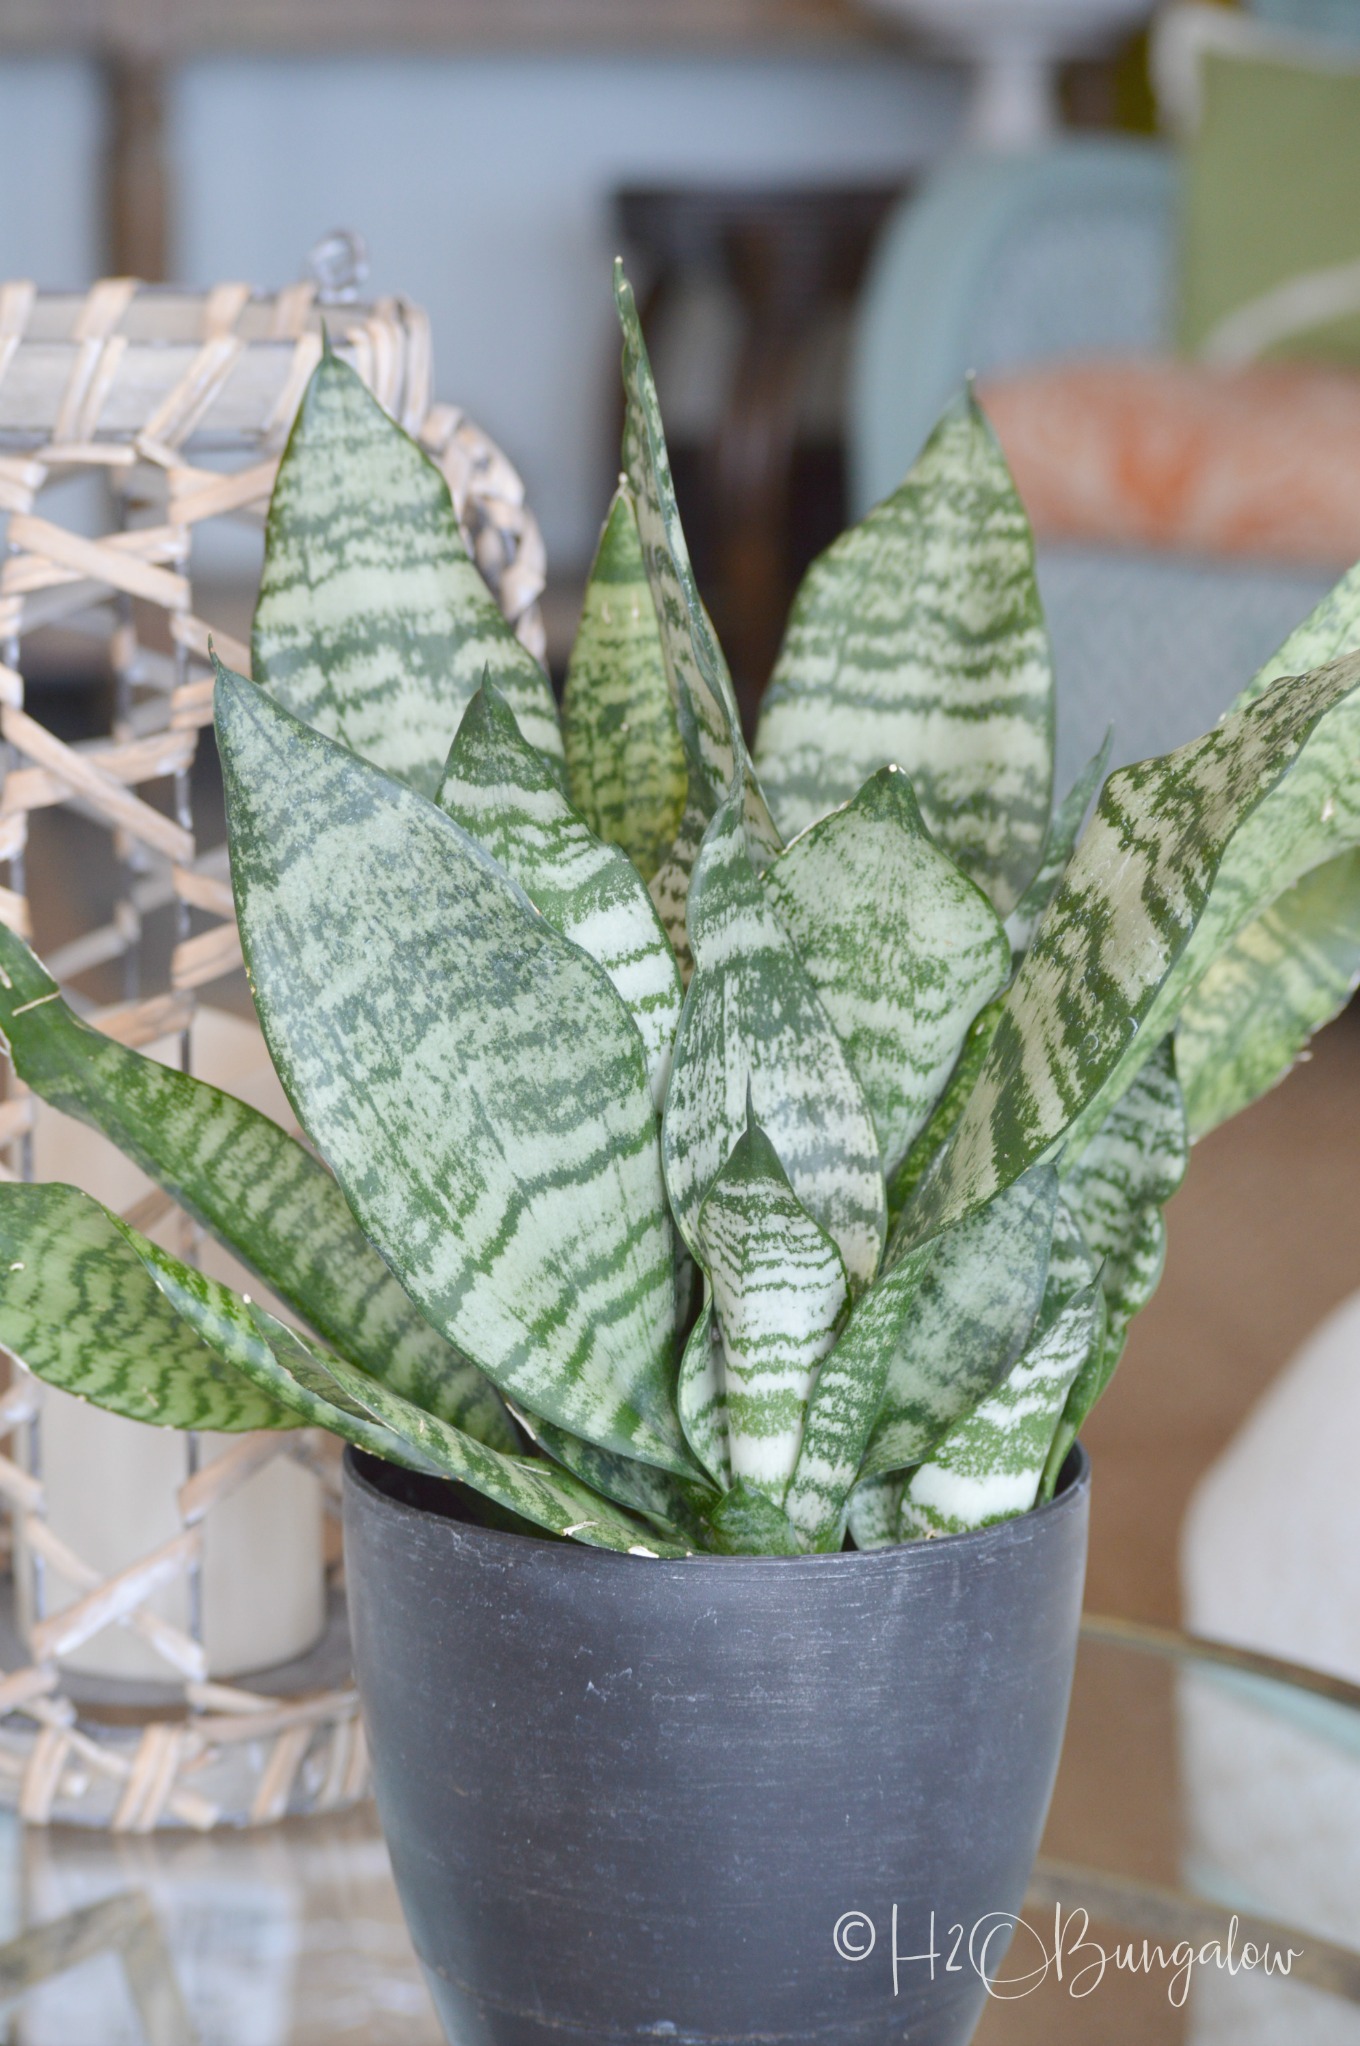 13 tough low light indoor plants that look great in any decor. Many of these low light plants are drought tolerant, and grow without much care. I've grouped these easy to grow hardy plants by vines, palms and other pretty indoor low light plants. 